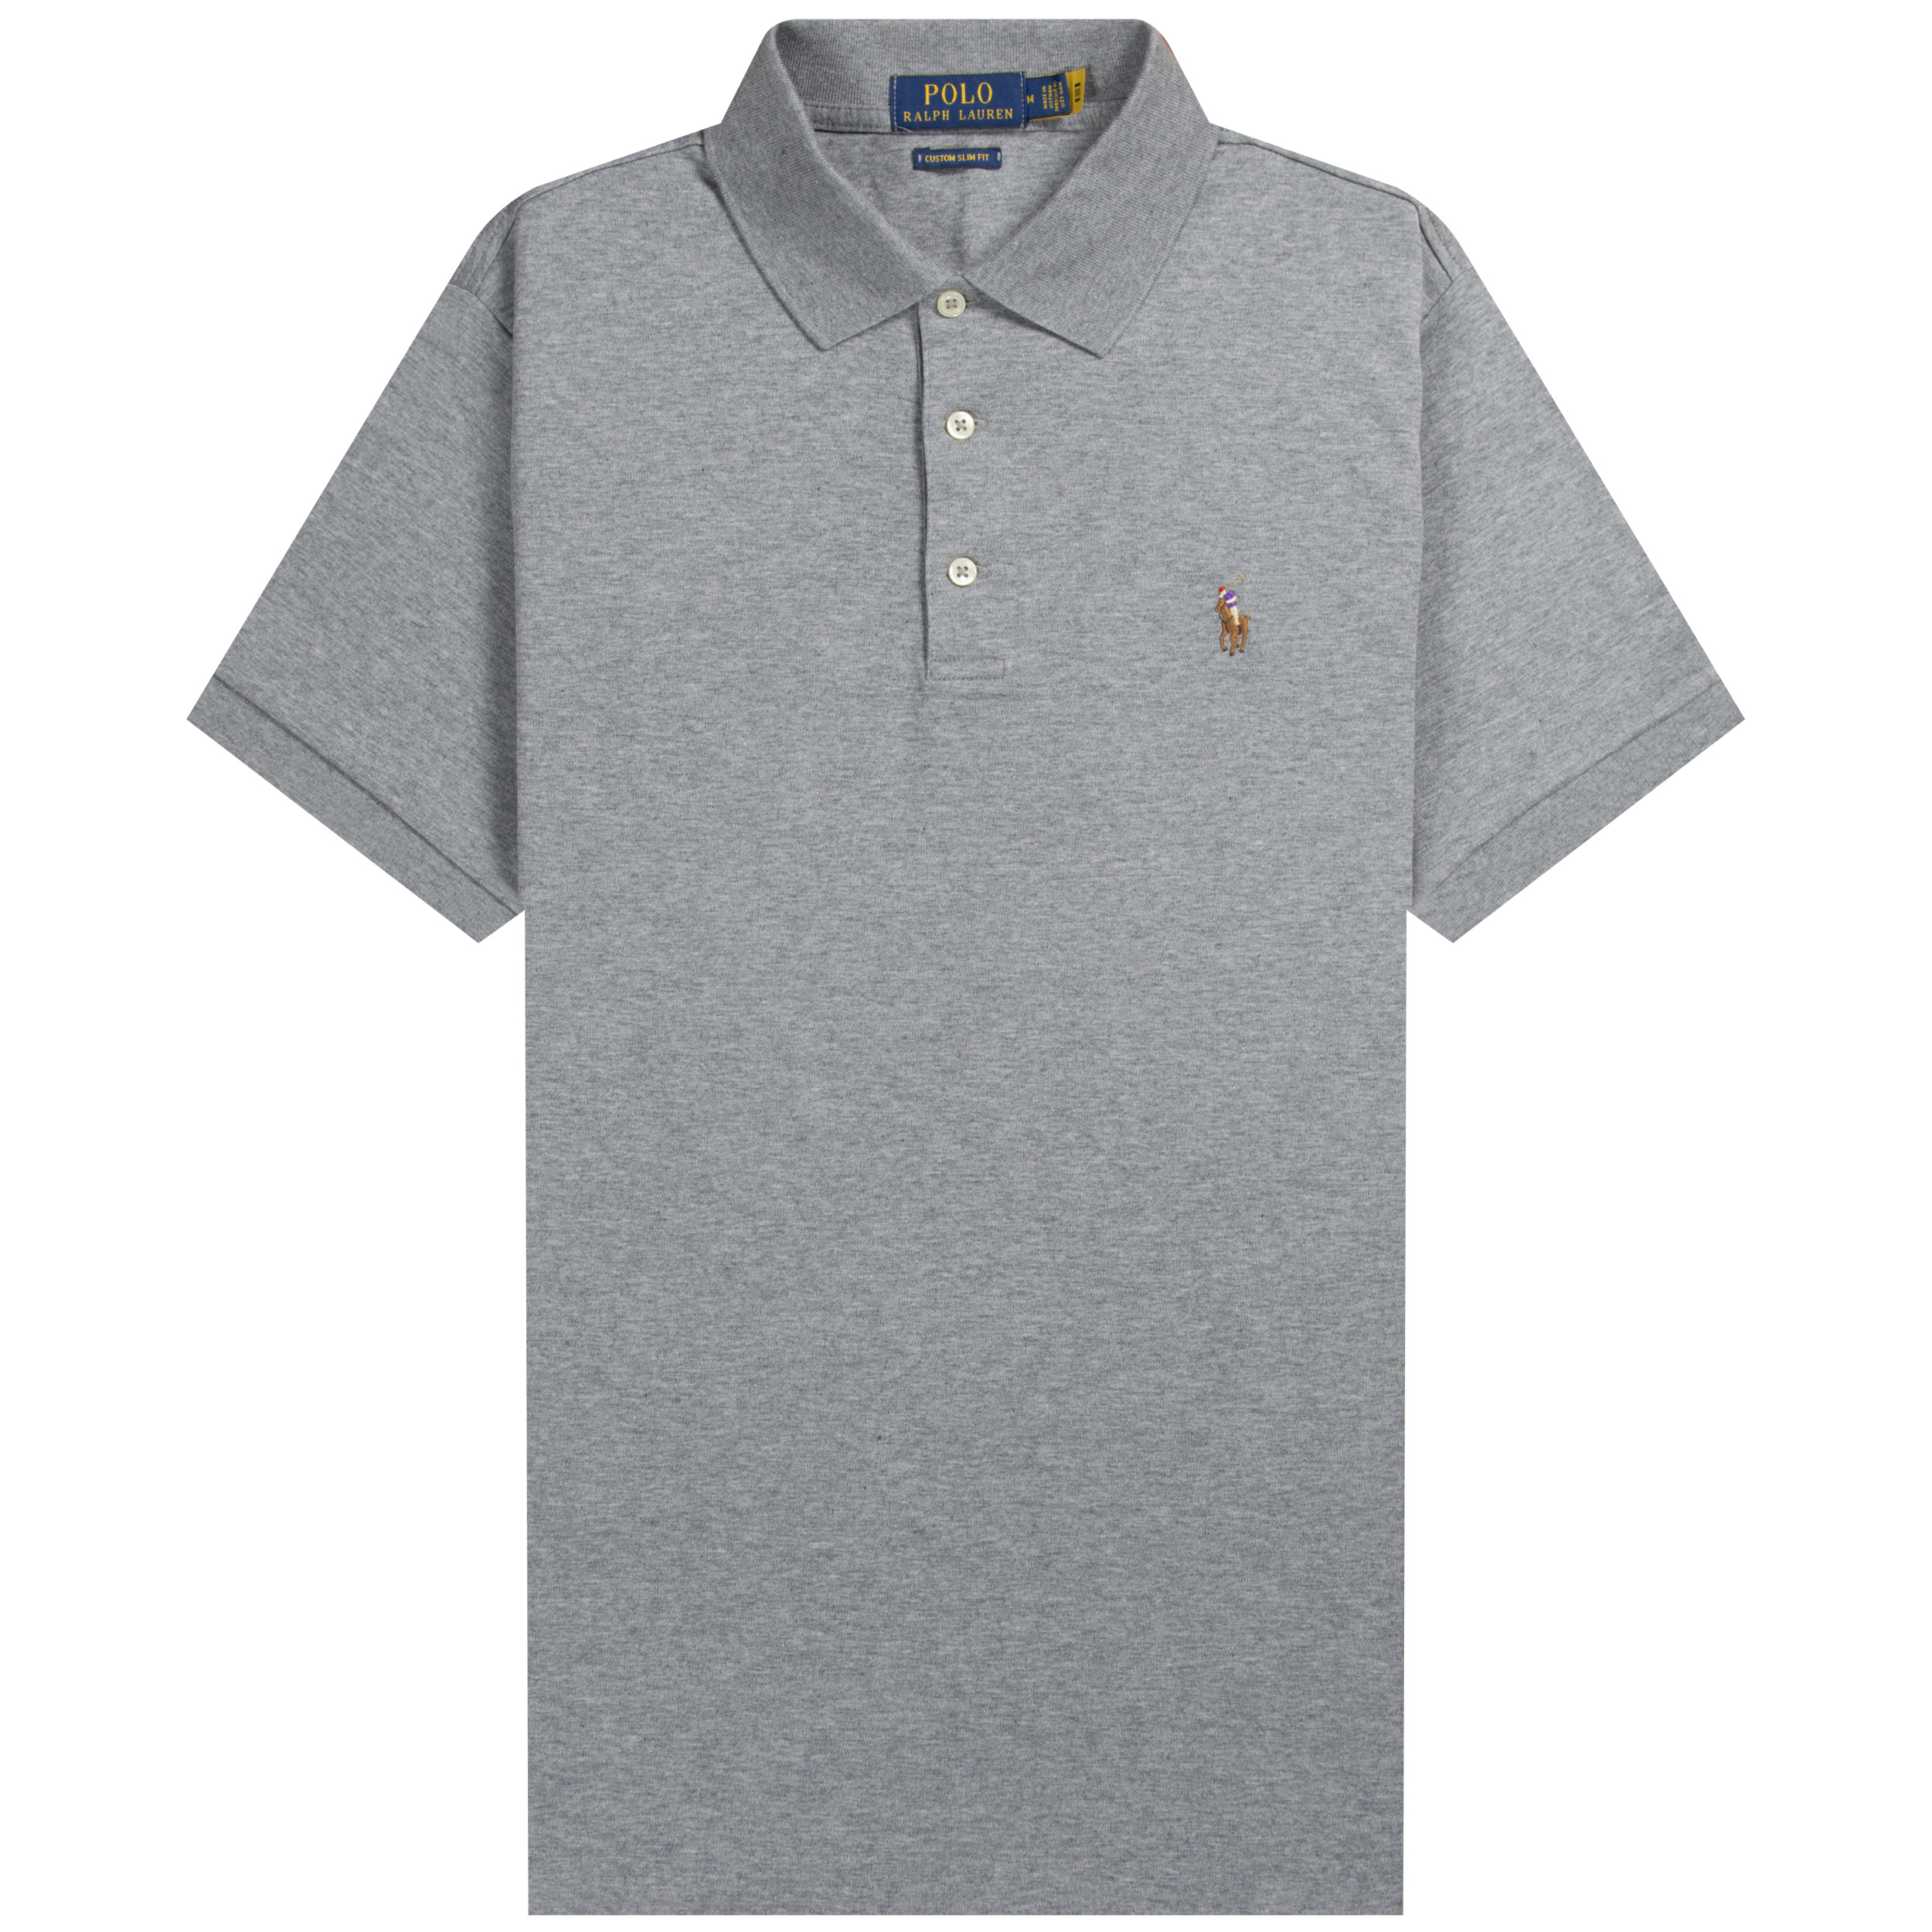 Polo Ralph Lauren Slim Fit Soft Touch Polo Grey